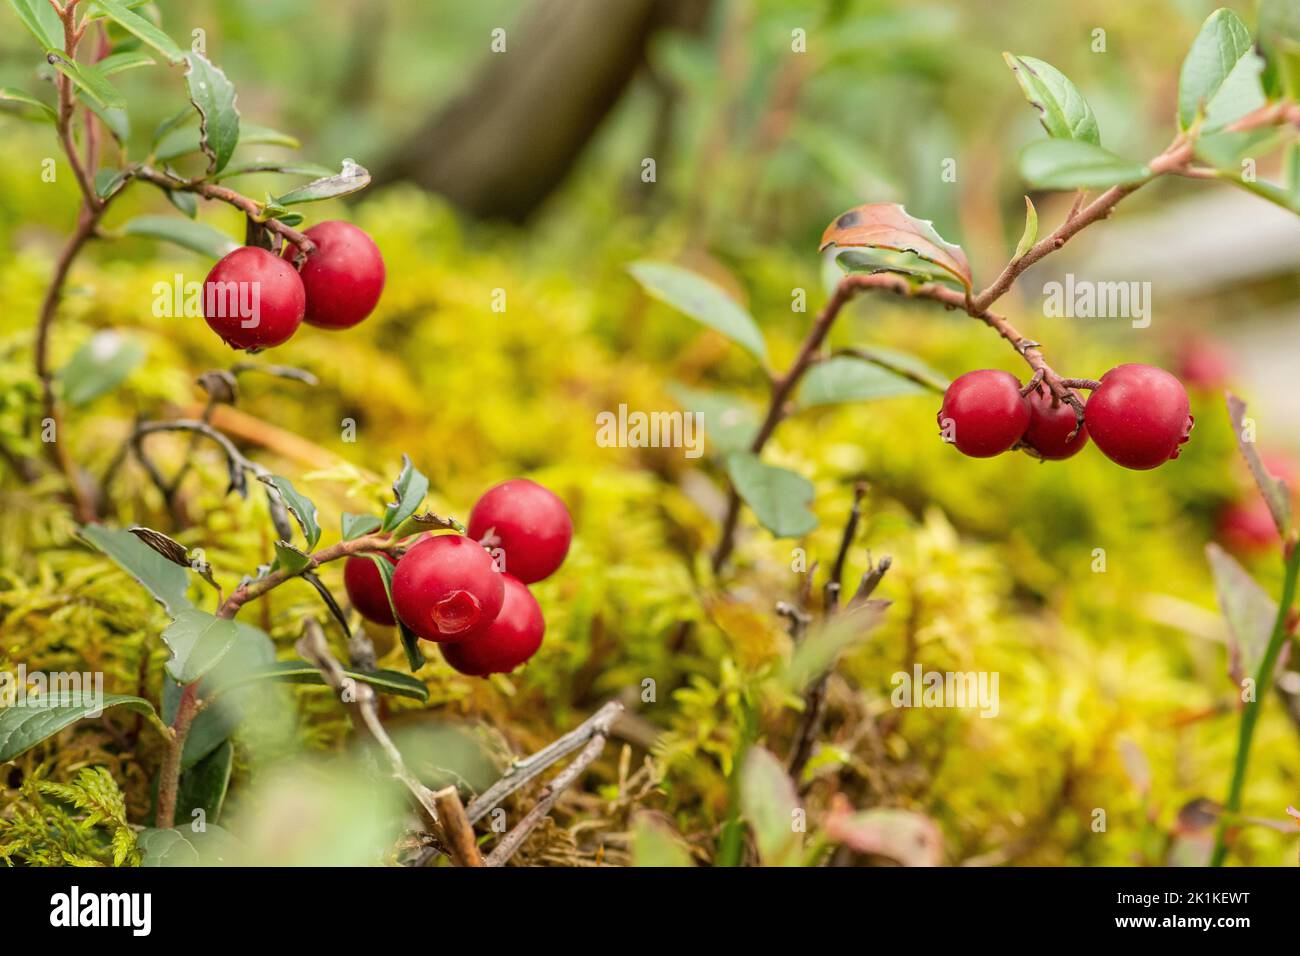 Beautiful bush of ripe red lingonberry, partridgeberry, mountain cranberry or cowberry among green leaves and moss in the forest or woods in autumn Stock Photo